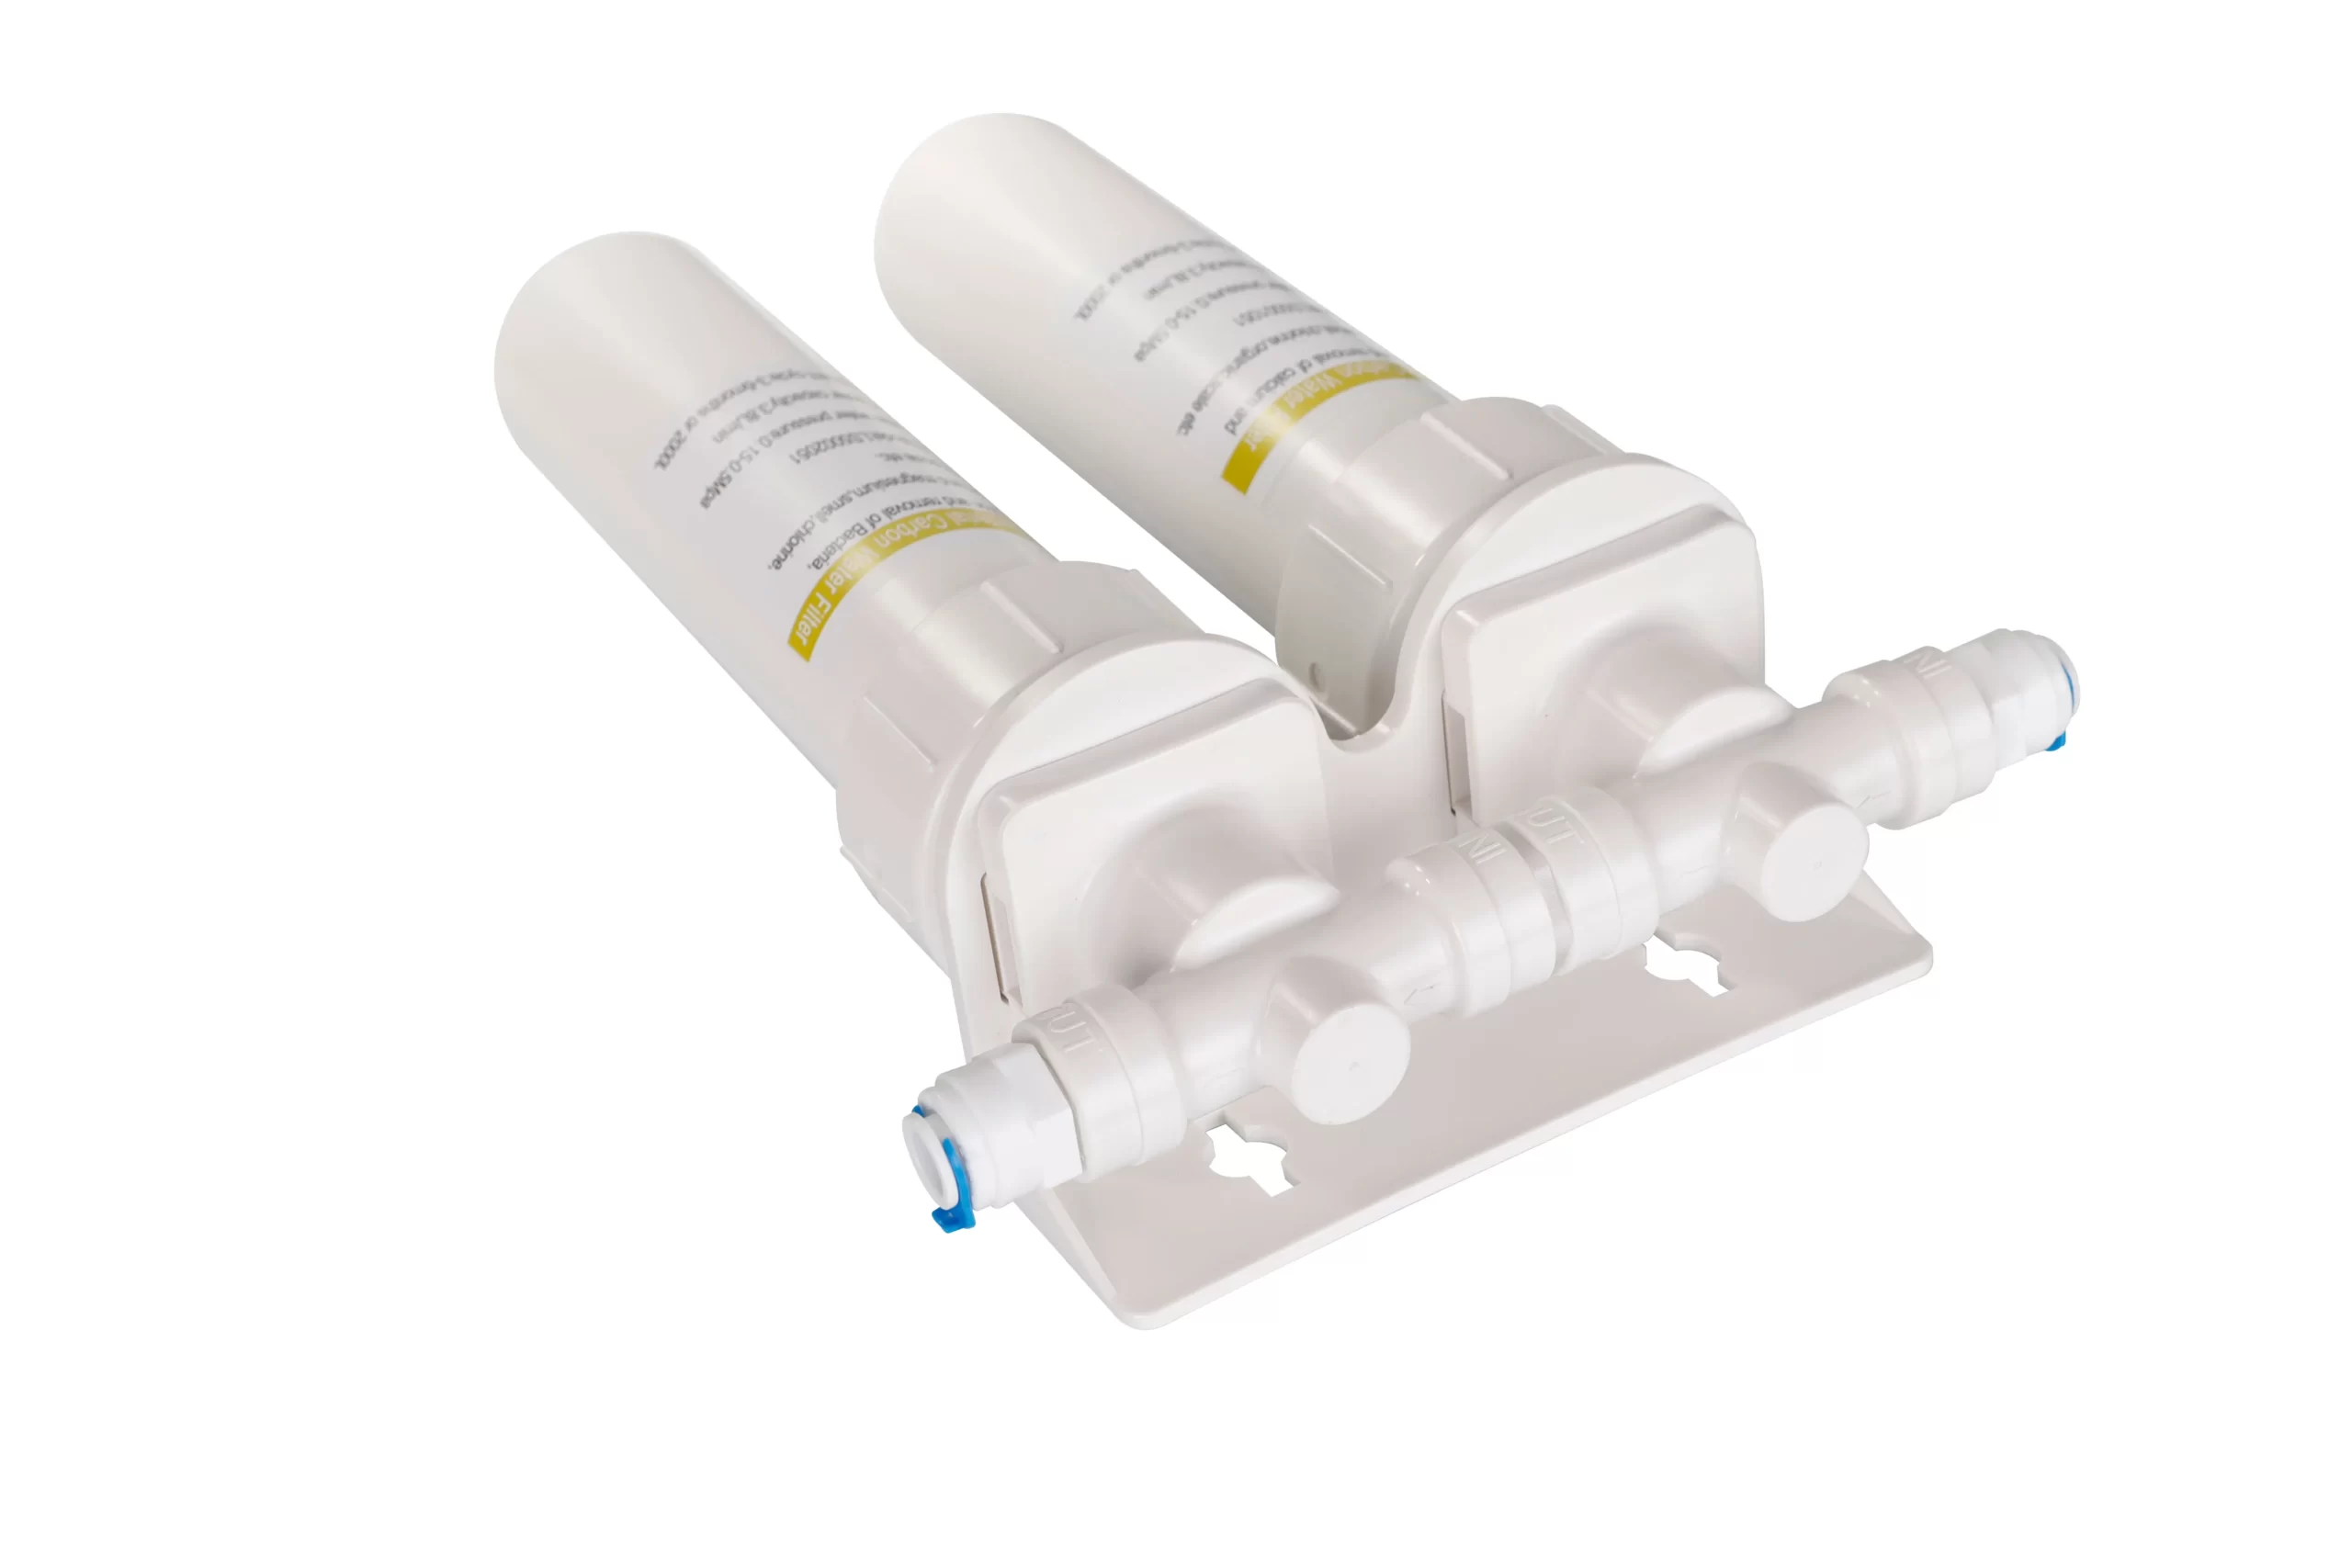 Two-stage water filter